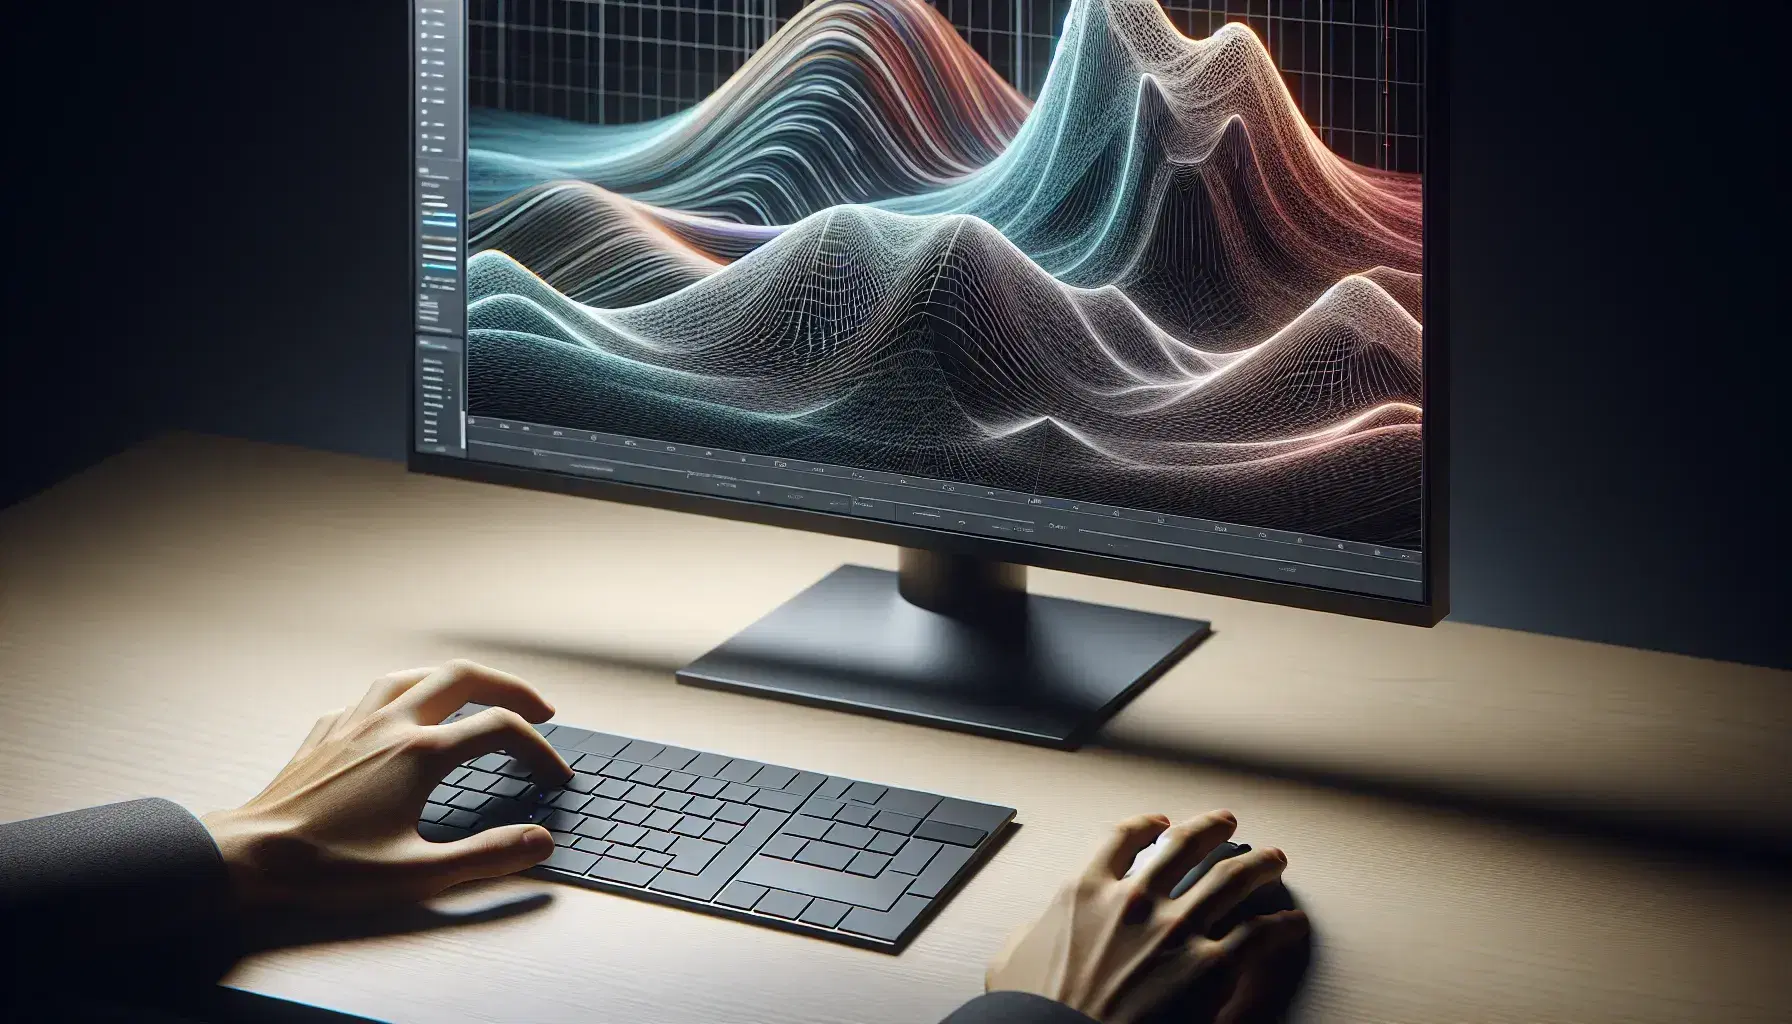 Close-up view of hands at a desk with a modern keyboard and mouse, in front of a monitor displaying a colorful 3D graph with peaks and valleys.